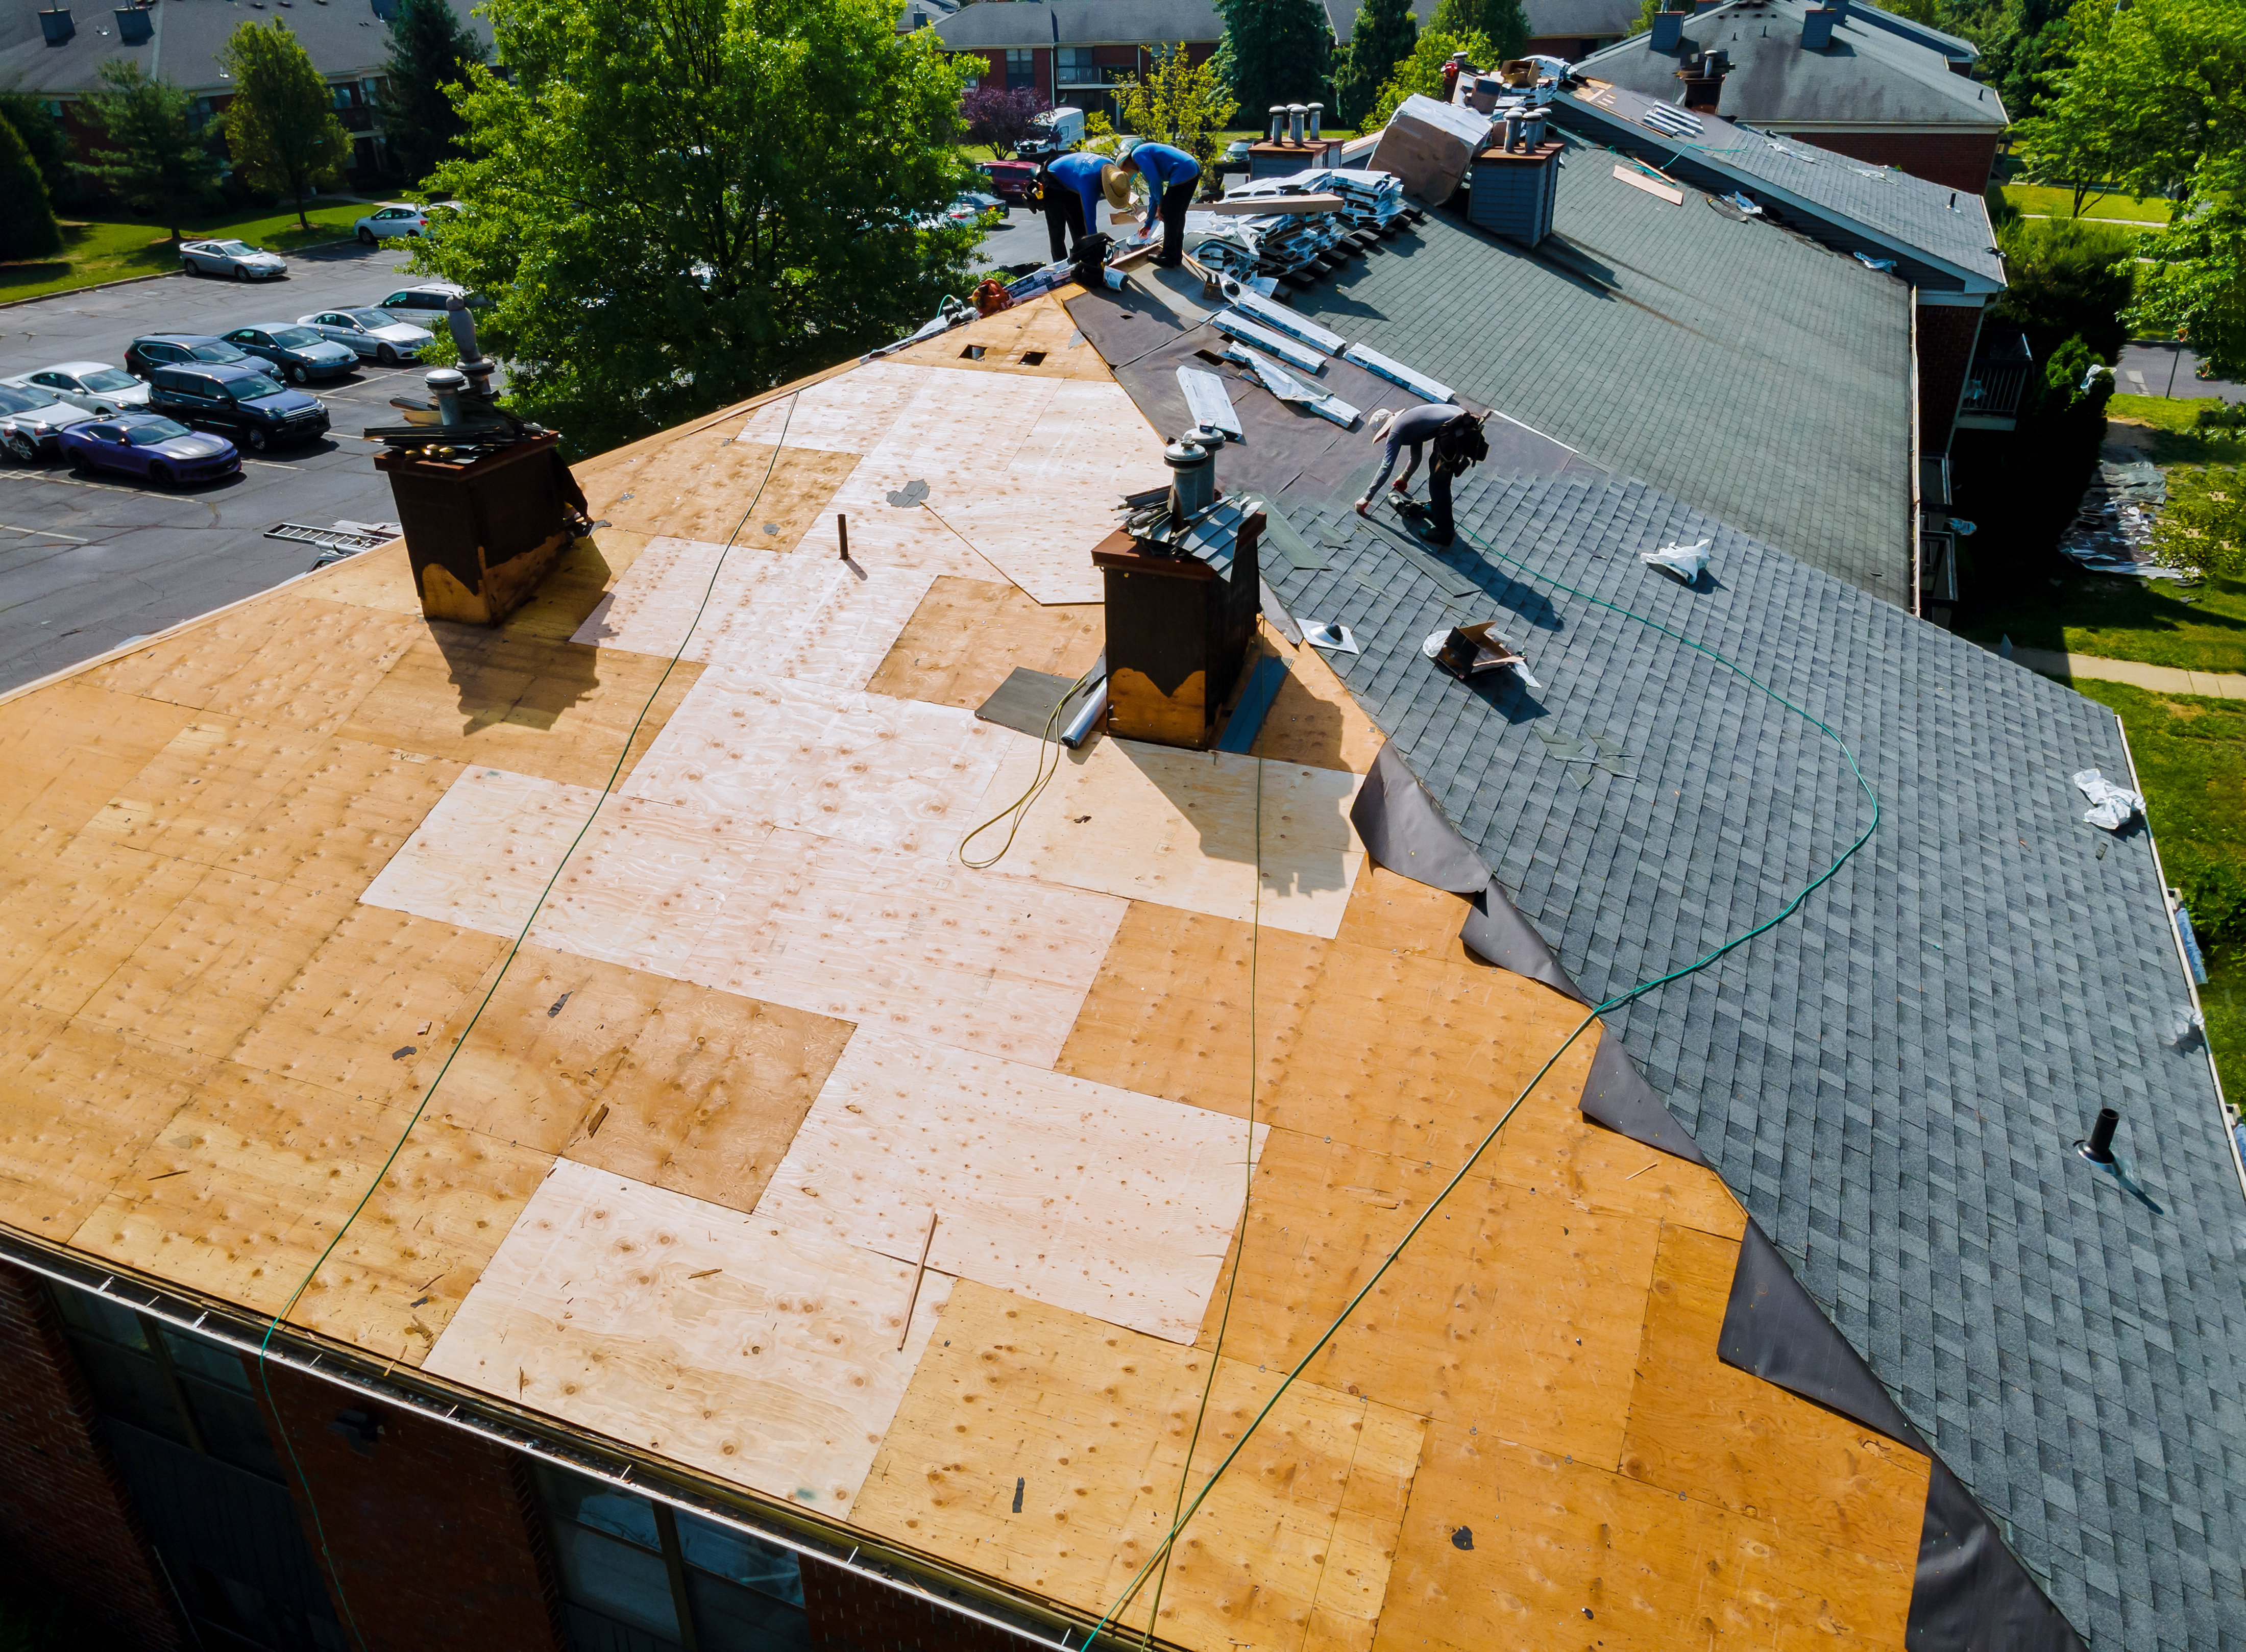 Professional Roofing Contractors in Ottawa are standing on a multi unit, multi pitched roof working to install dark shingles. Half the roof has been shingled; the other half shows the bare plywood sheets ready to be covered. Roll roofing products and packages of shingles appear in the background.